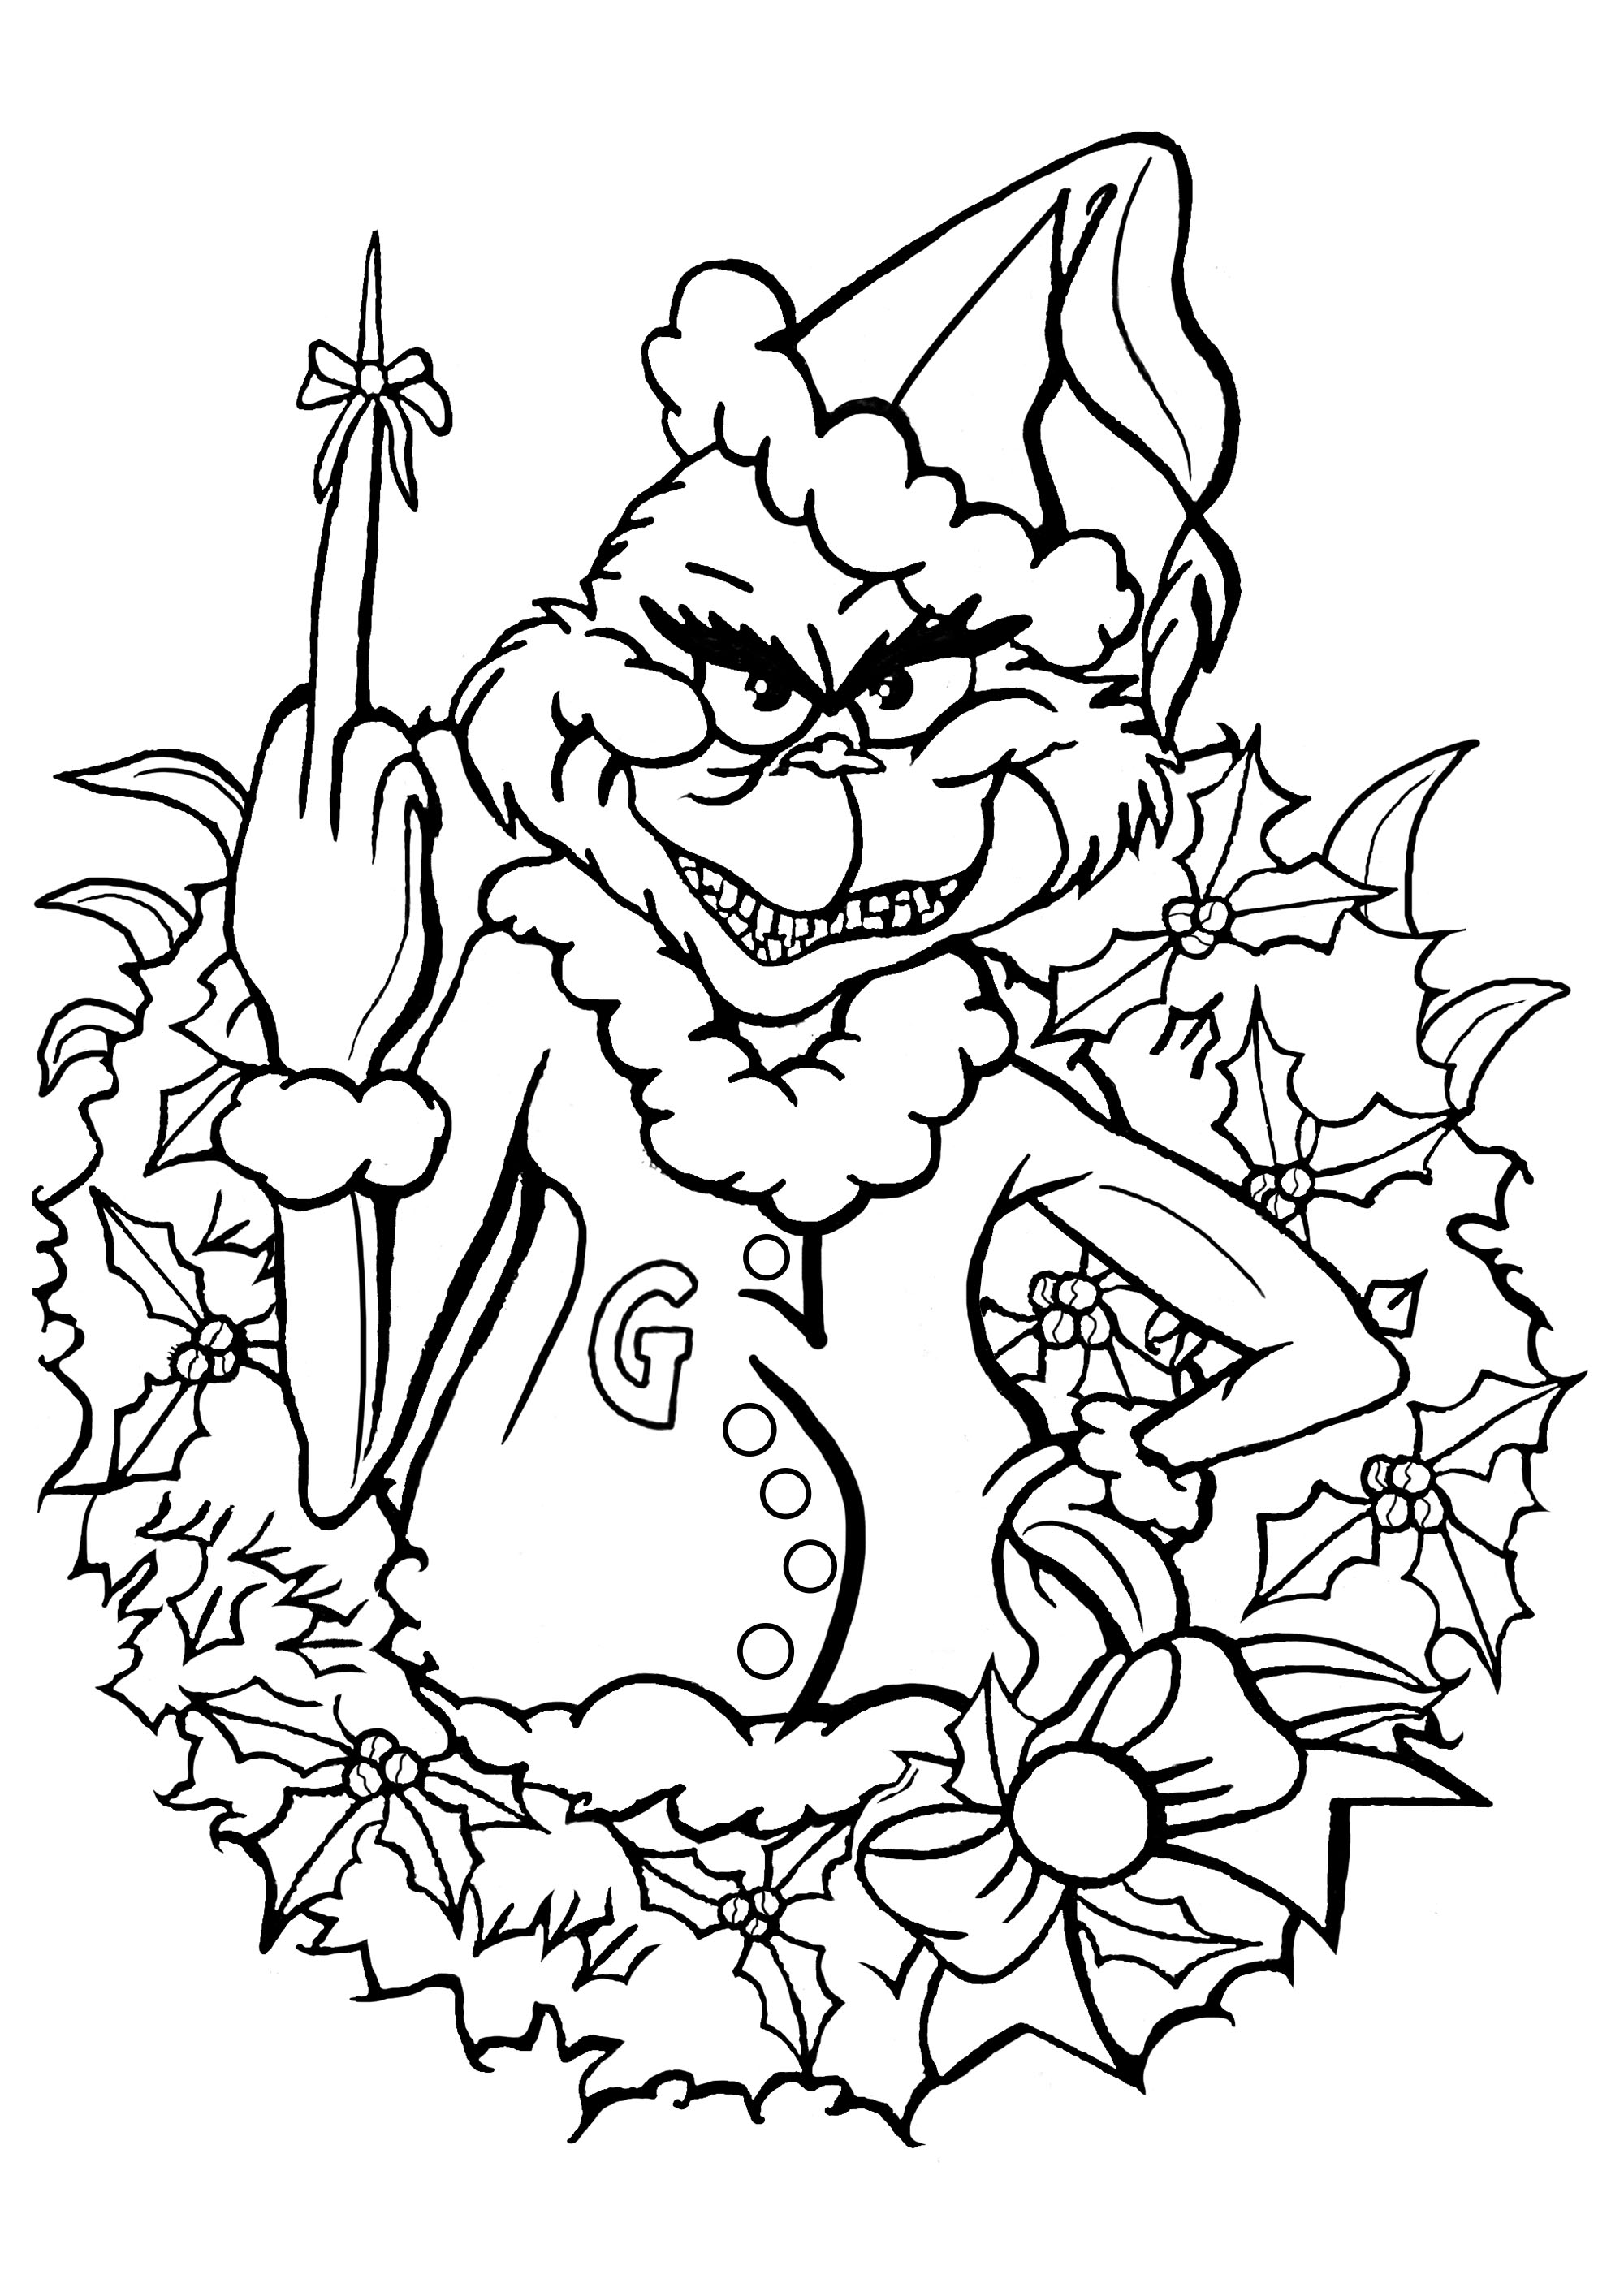 the-grinch-christmas-adult-coloring-pages